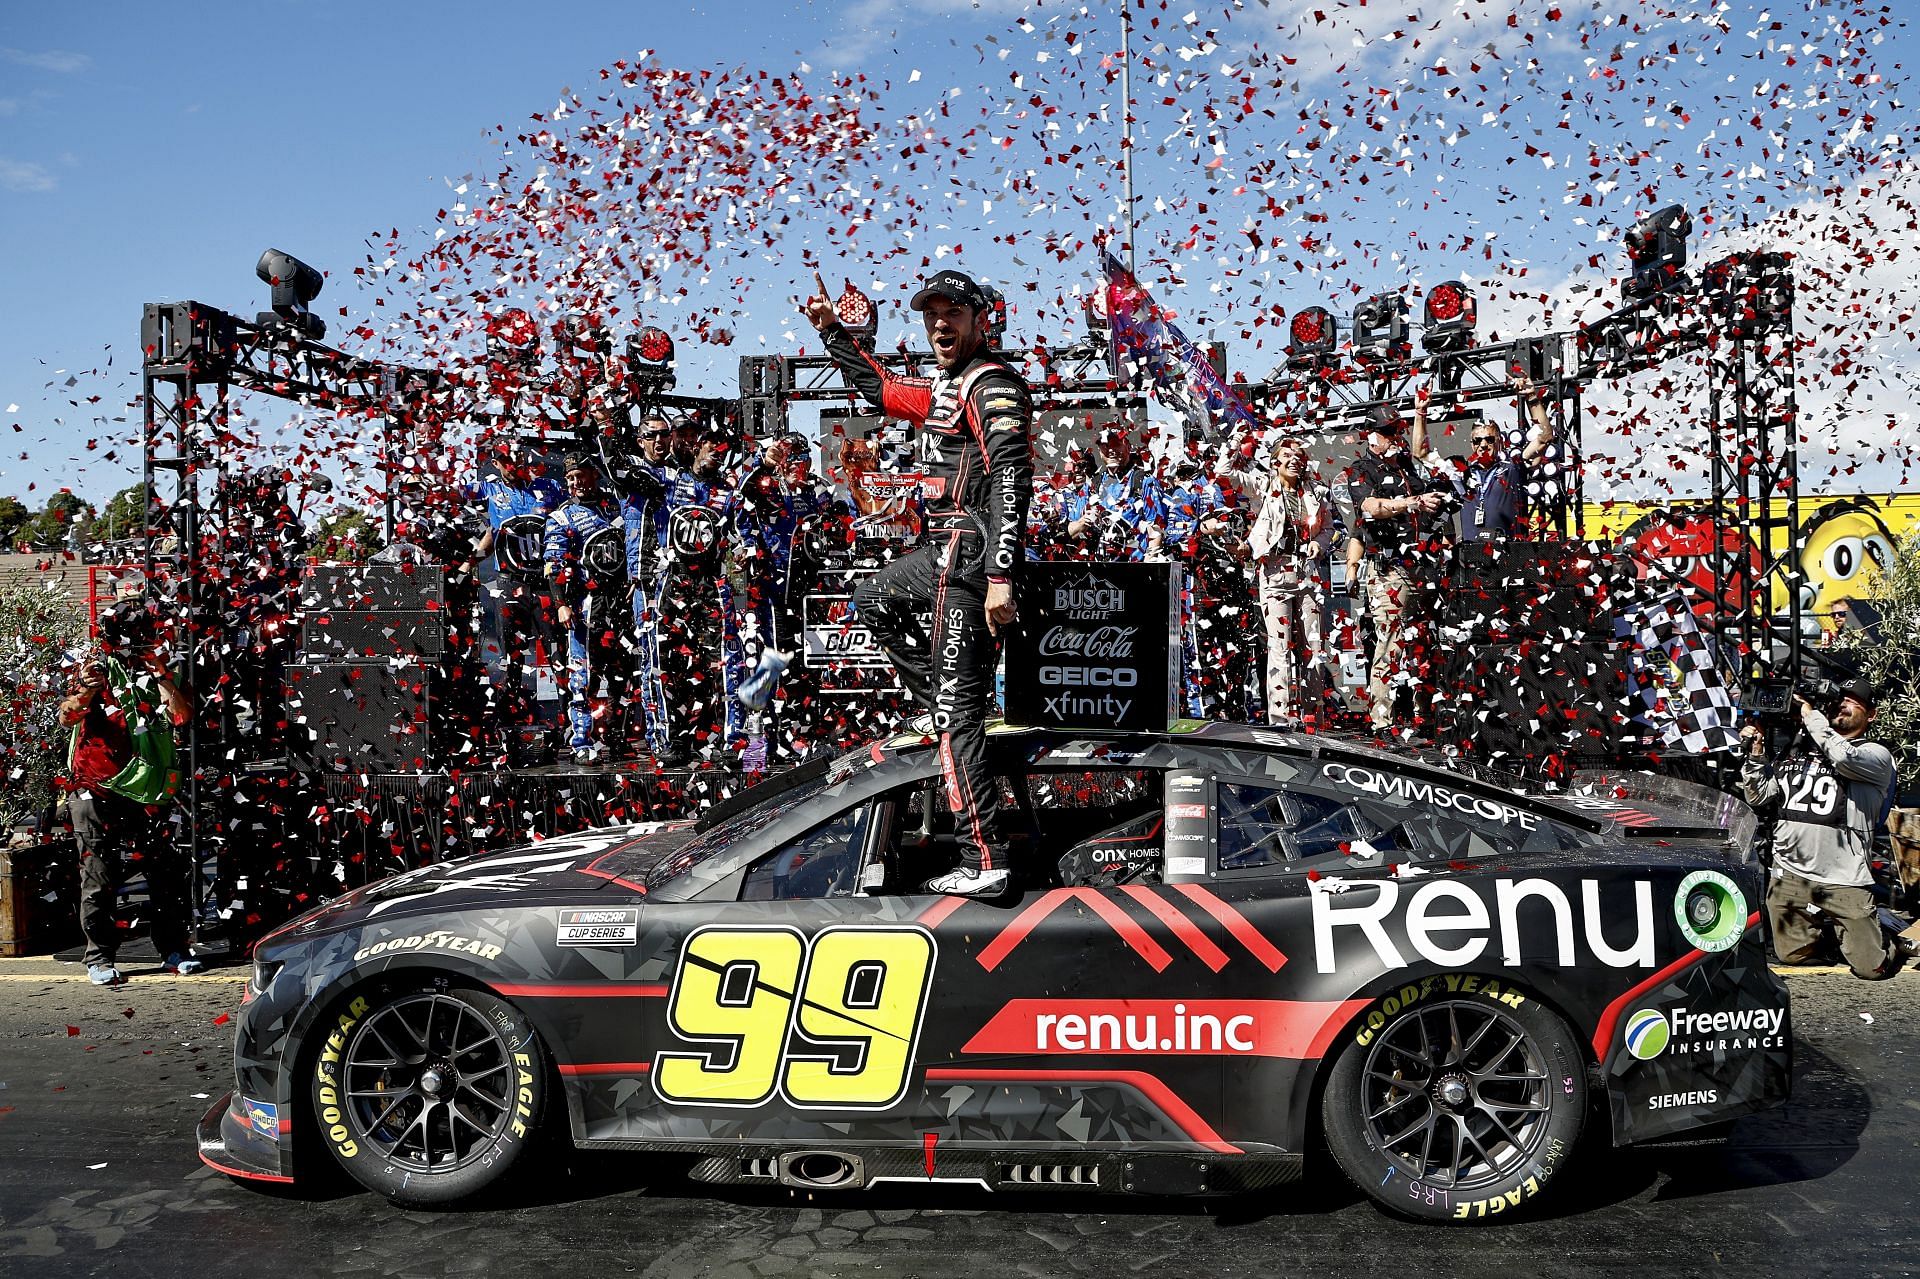 Daniel Suarez celebrates in victory lane after winning the NASCAR Cup Series Toyota/Save Mart 350 at Sonoma Raceway (Photo by Chris Graythen/Getty Images)